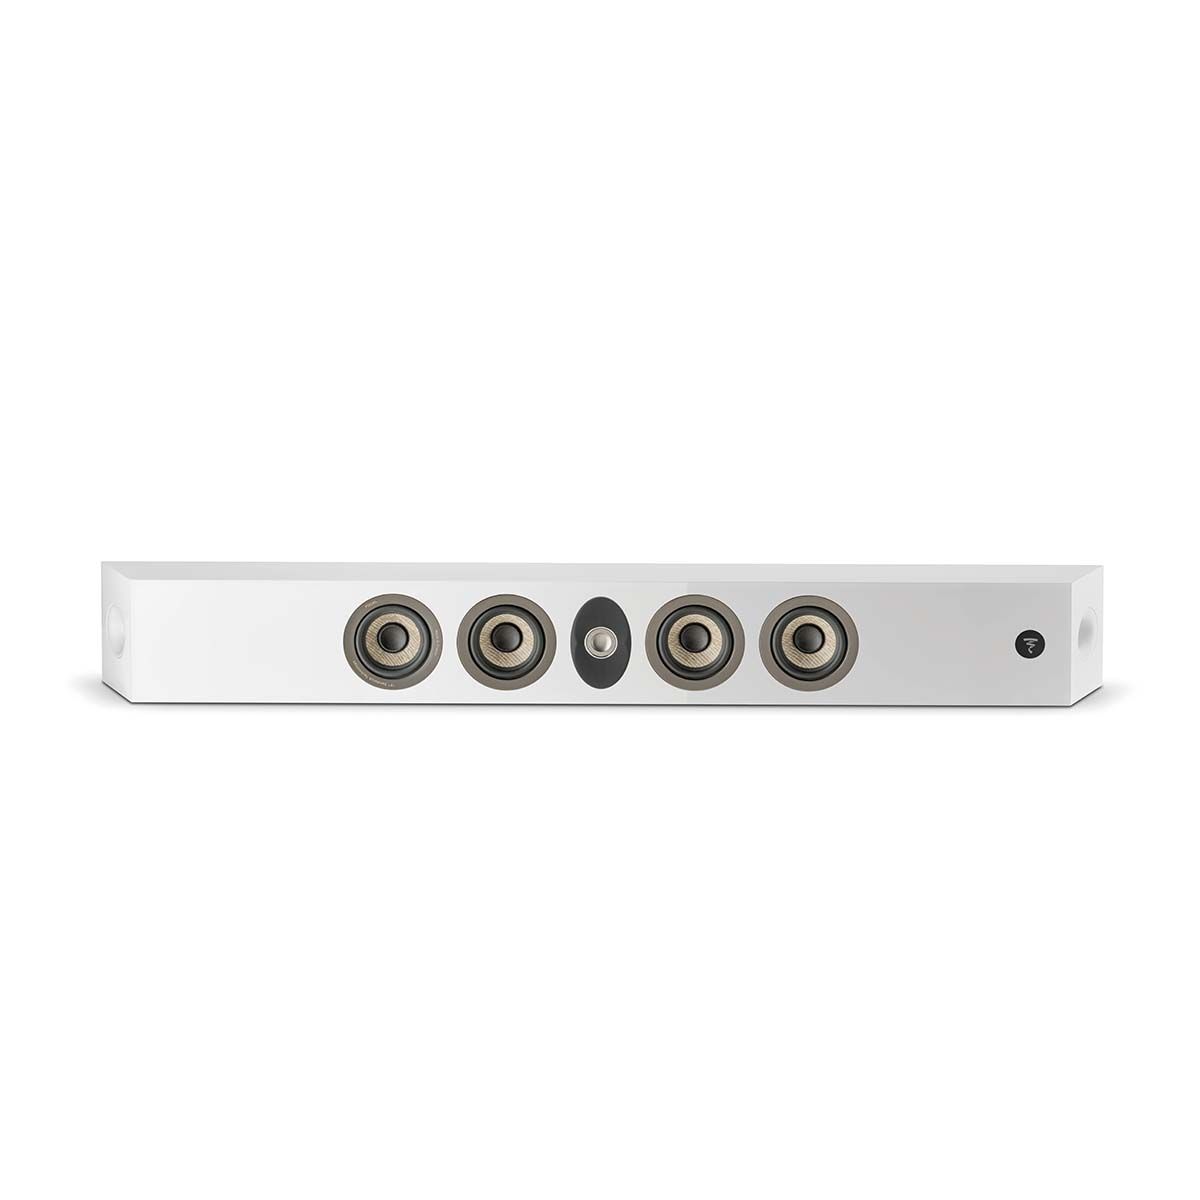 Focal On Wall 302 Speaker, Gloss White, horizontal front view without grille